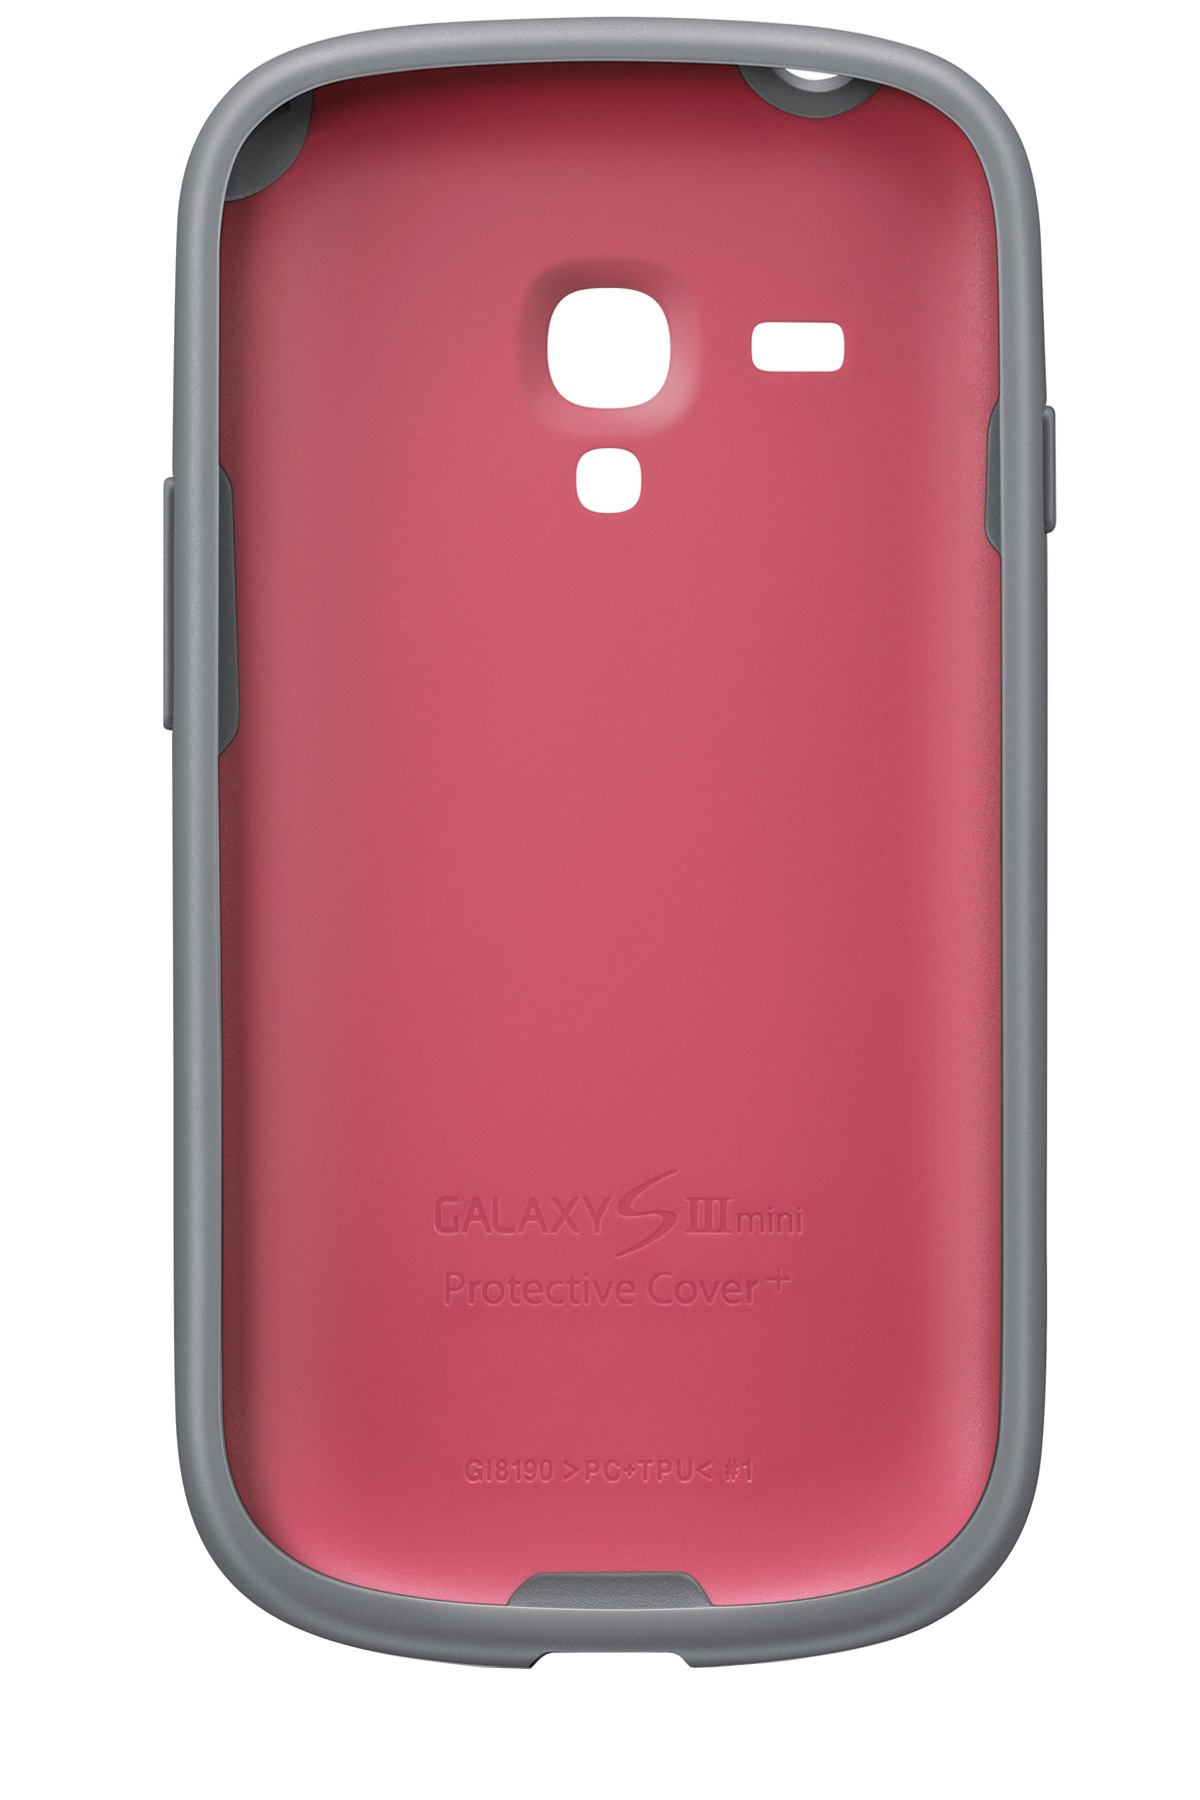 S3 mini Pink / Grey protective cover | Samsung Support IE